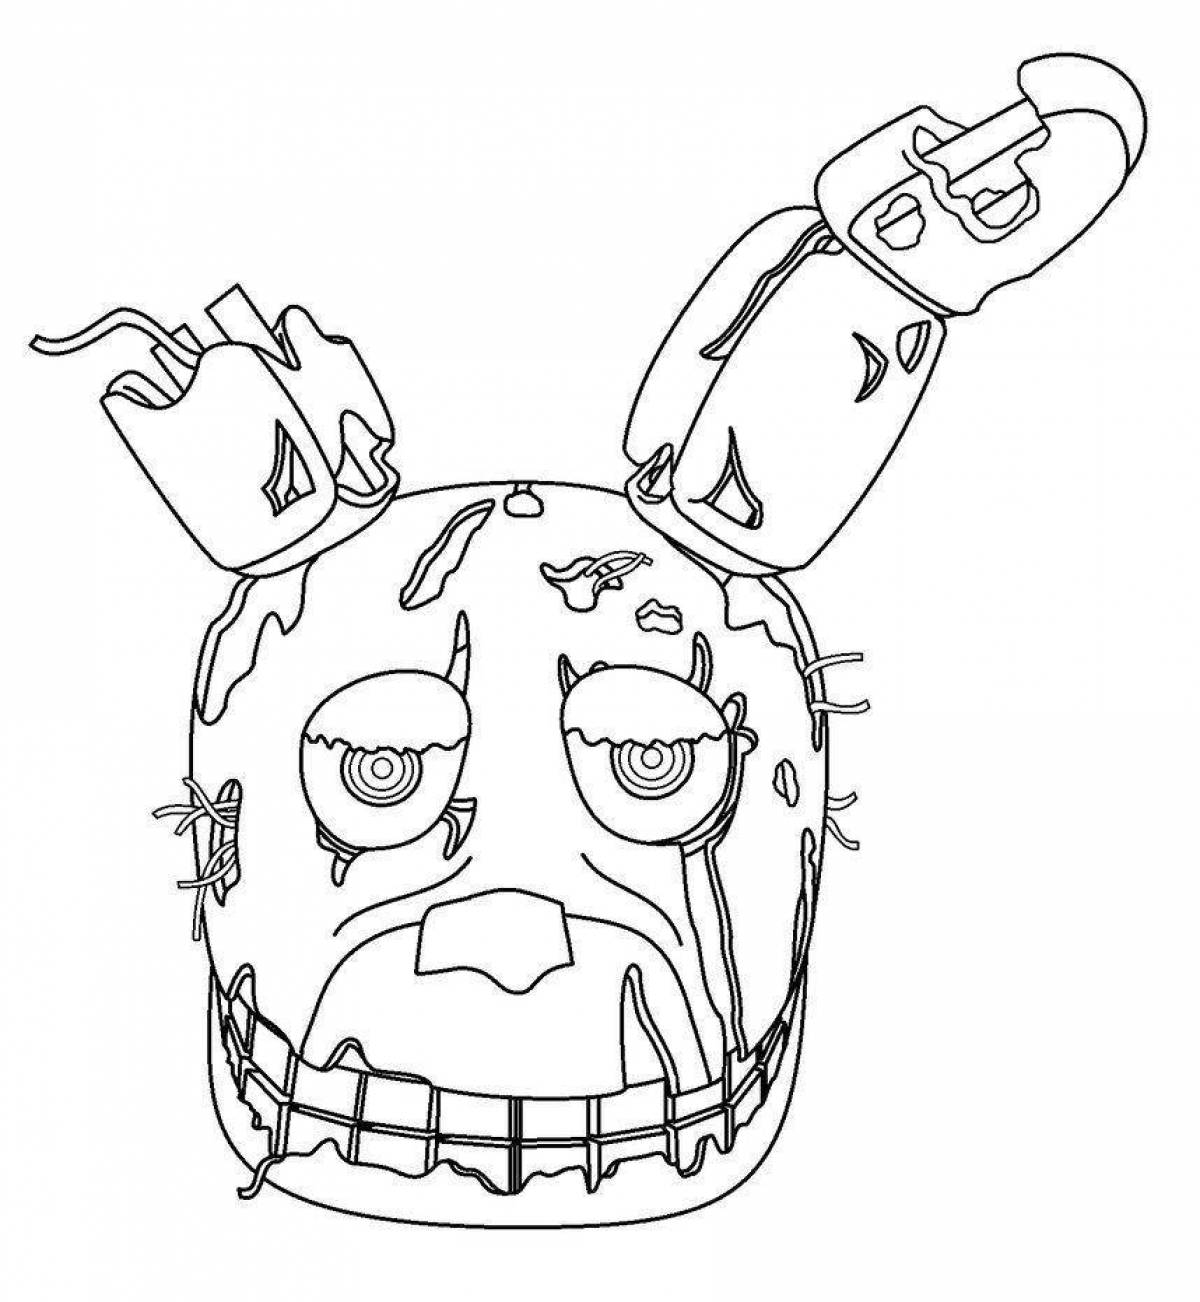 Gorgeous Springtrap coloring page